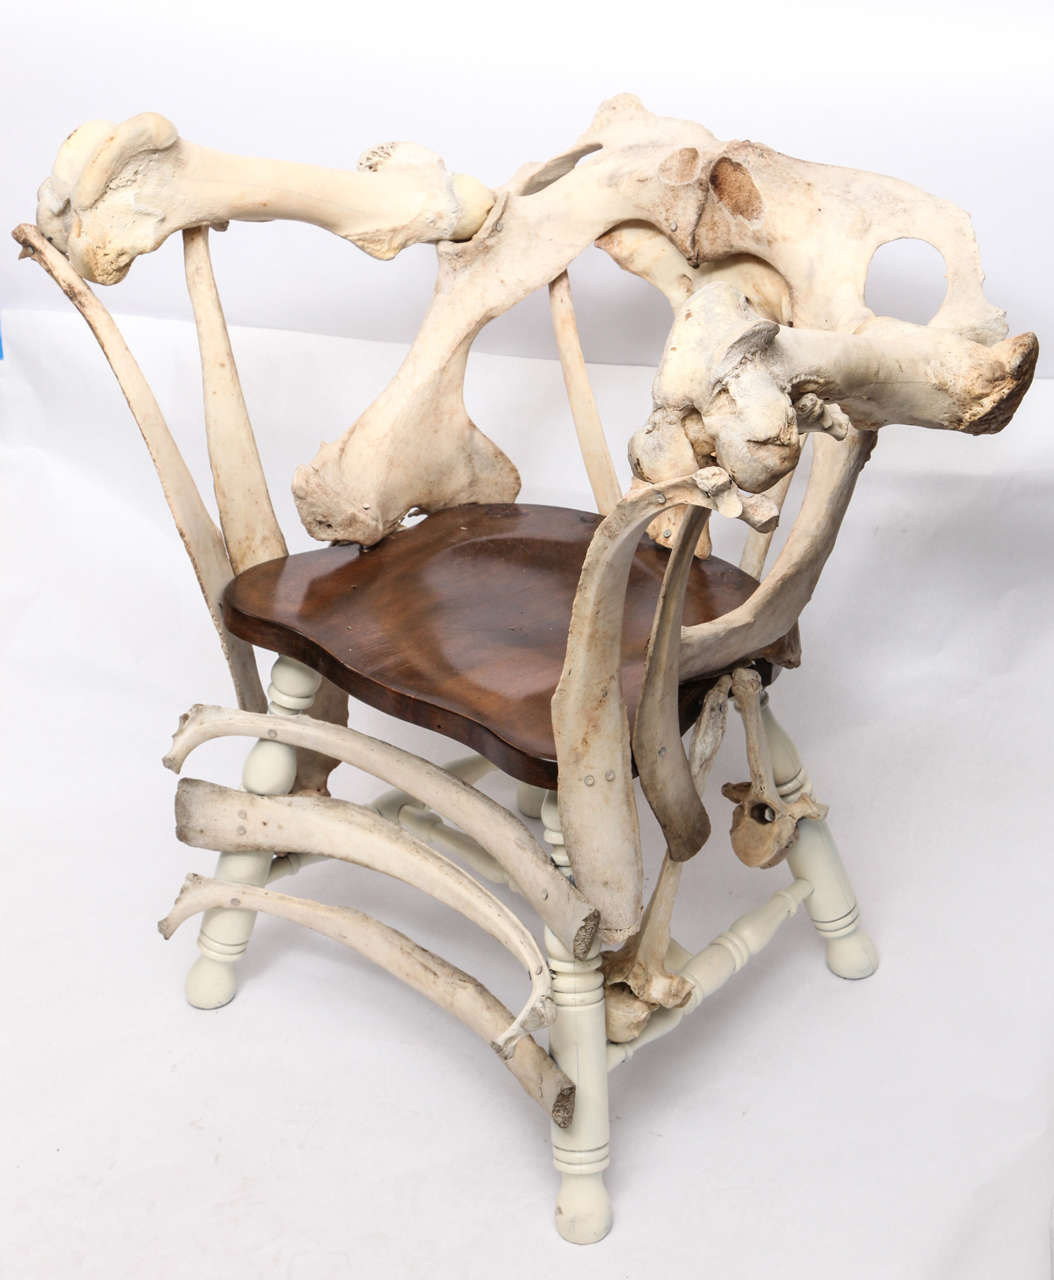 A modernist sculptural chair crafted of cow bones.